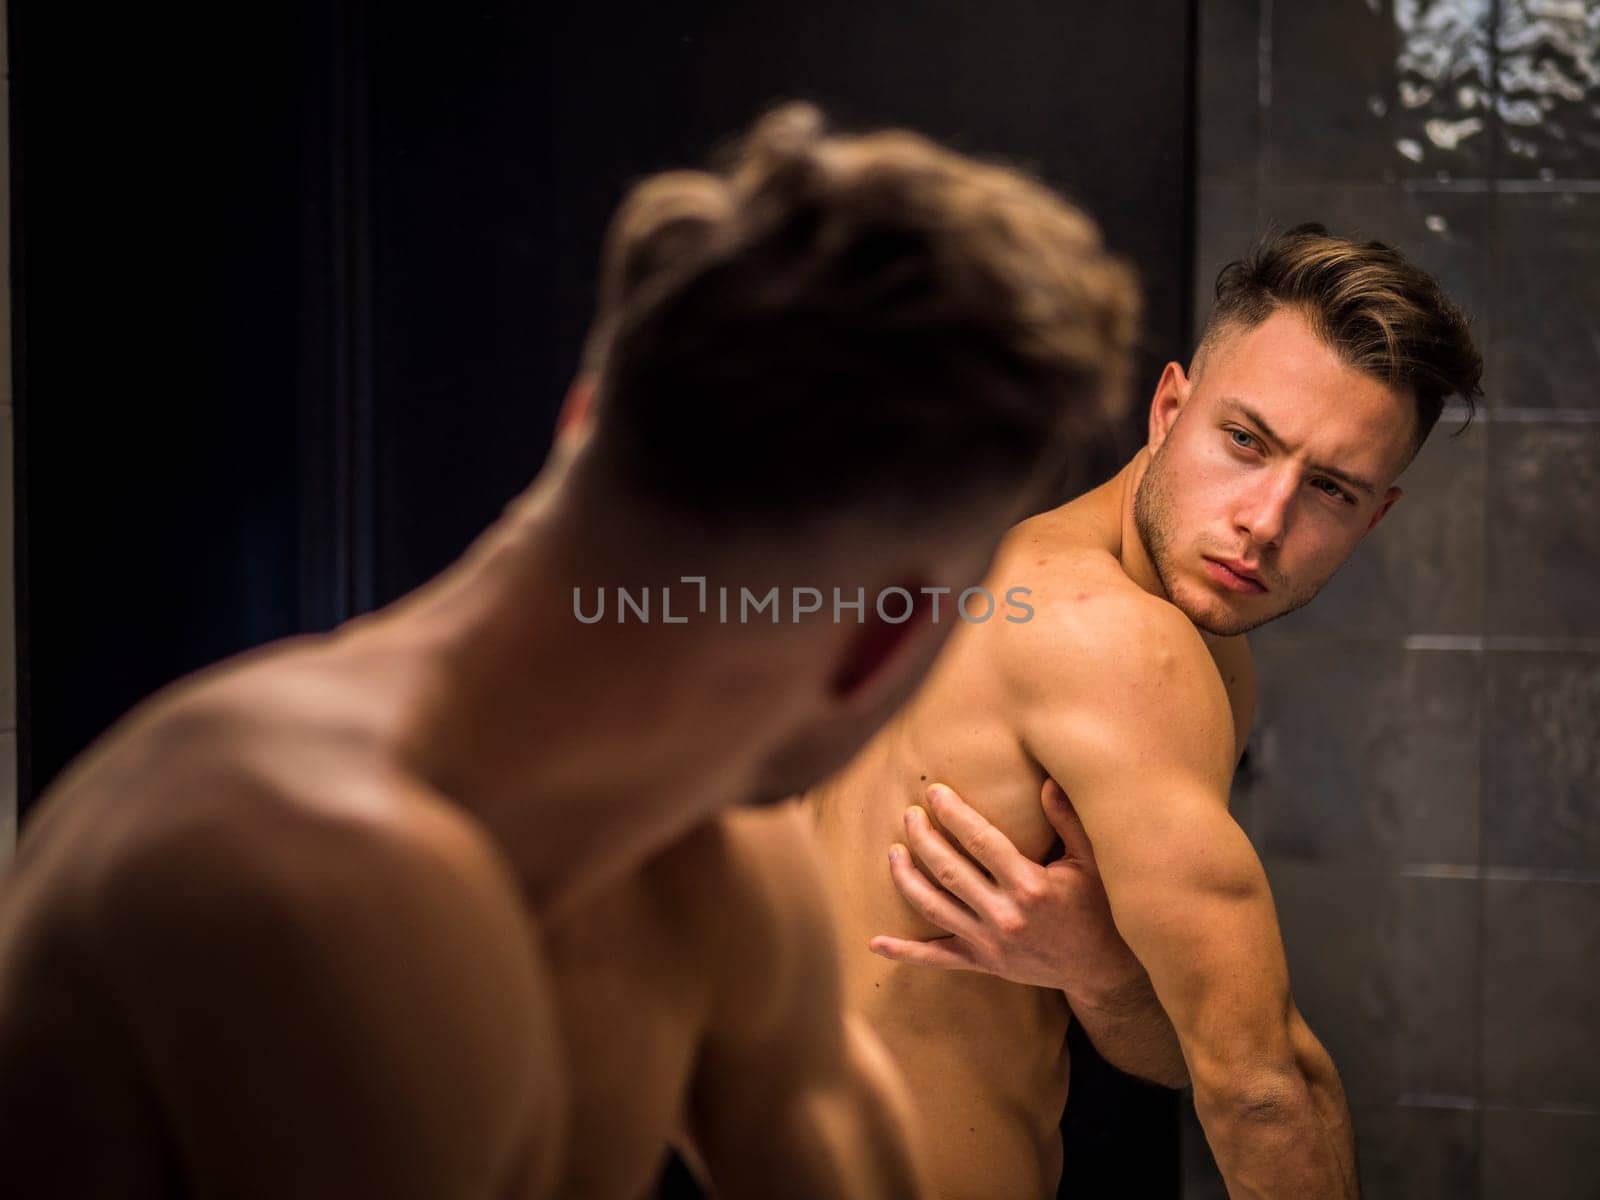 A shirtless man looking at himself in the mirror. Photo of a young man admiring his muscular physique in the mirror